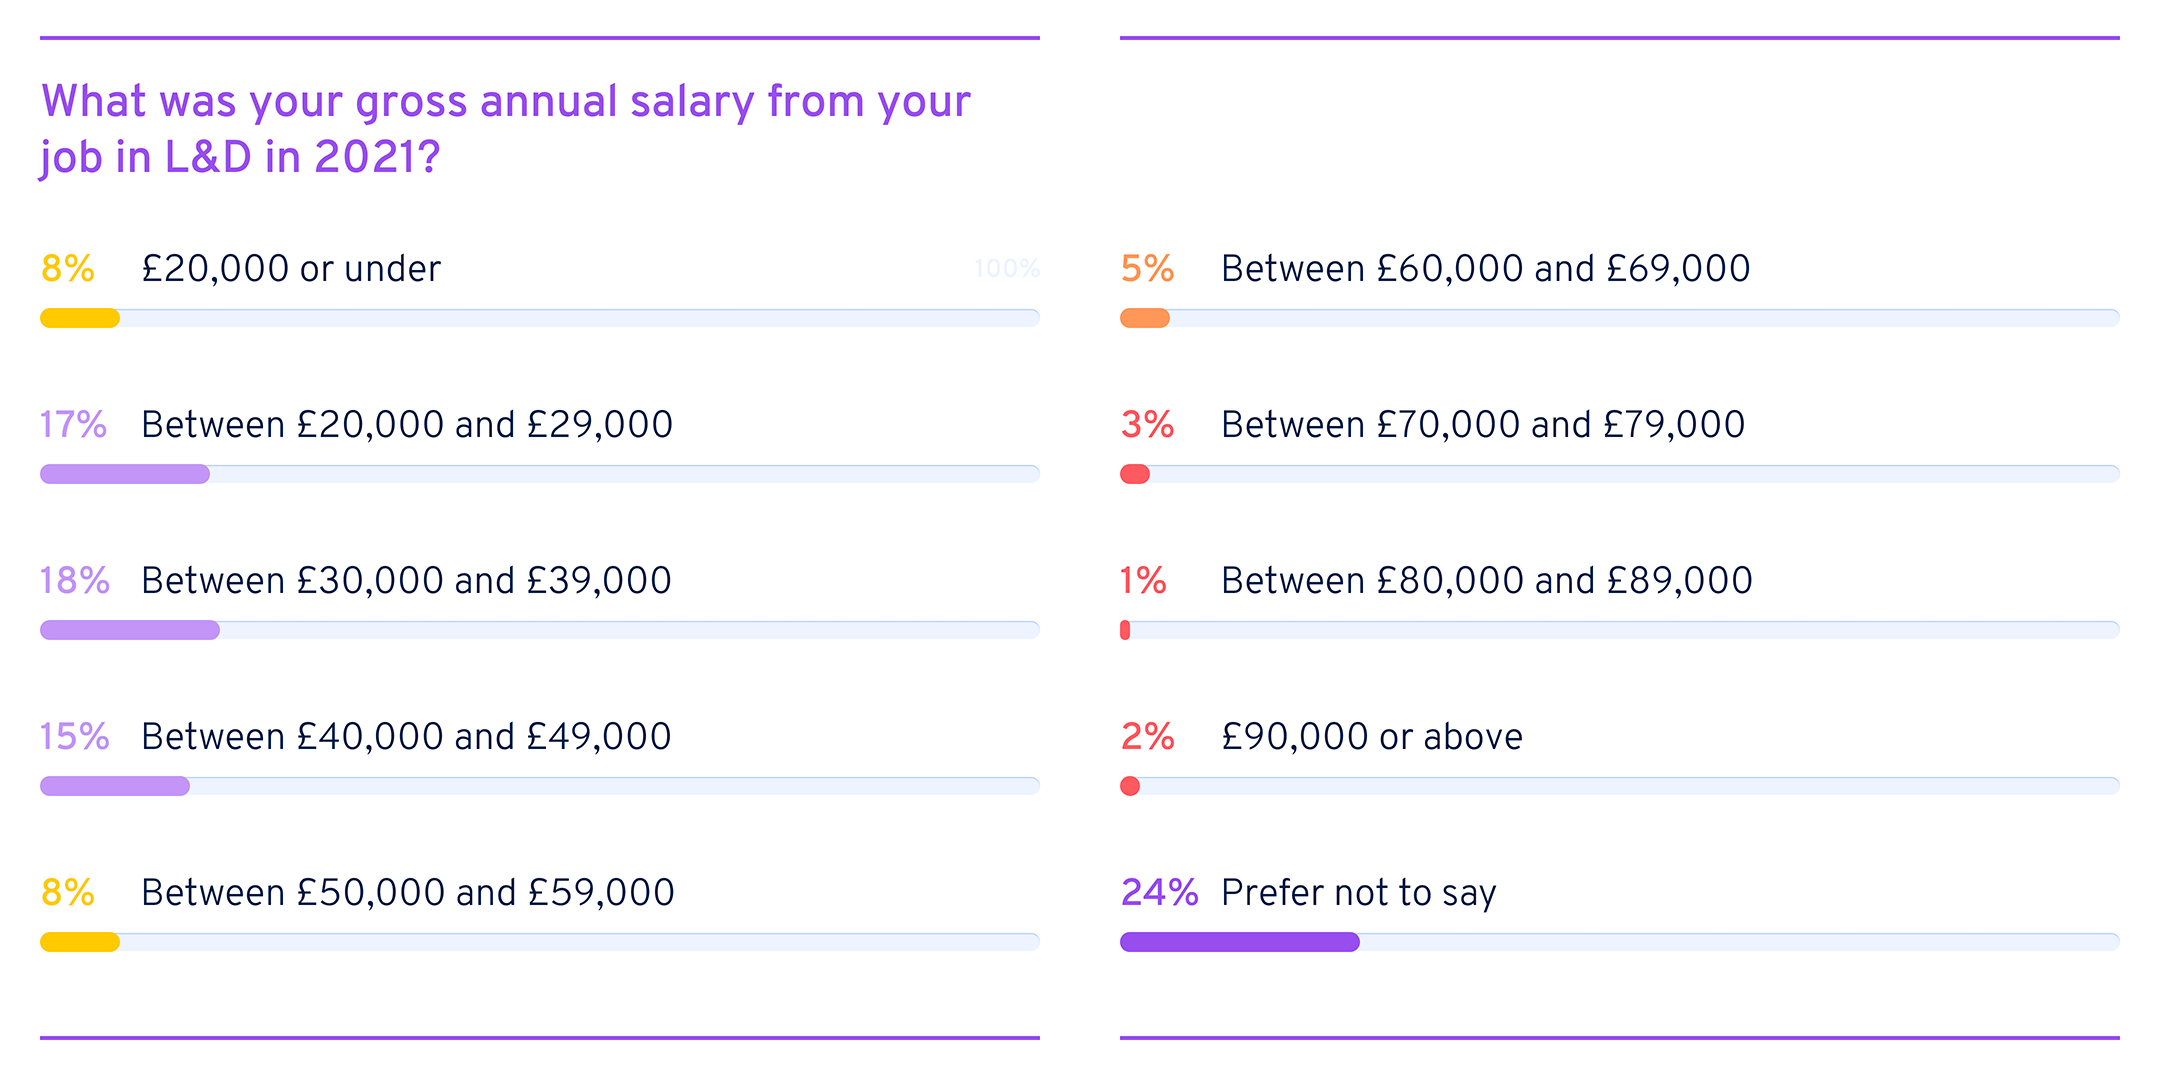 What was your gross annual salary from your job in L&D in 2021